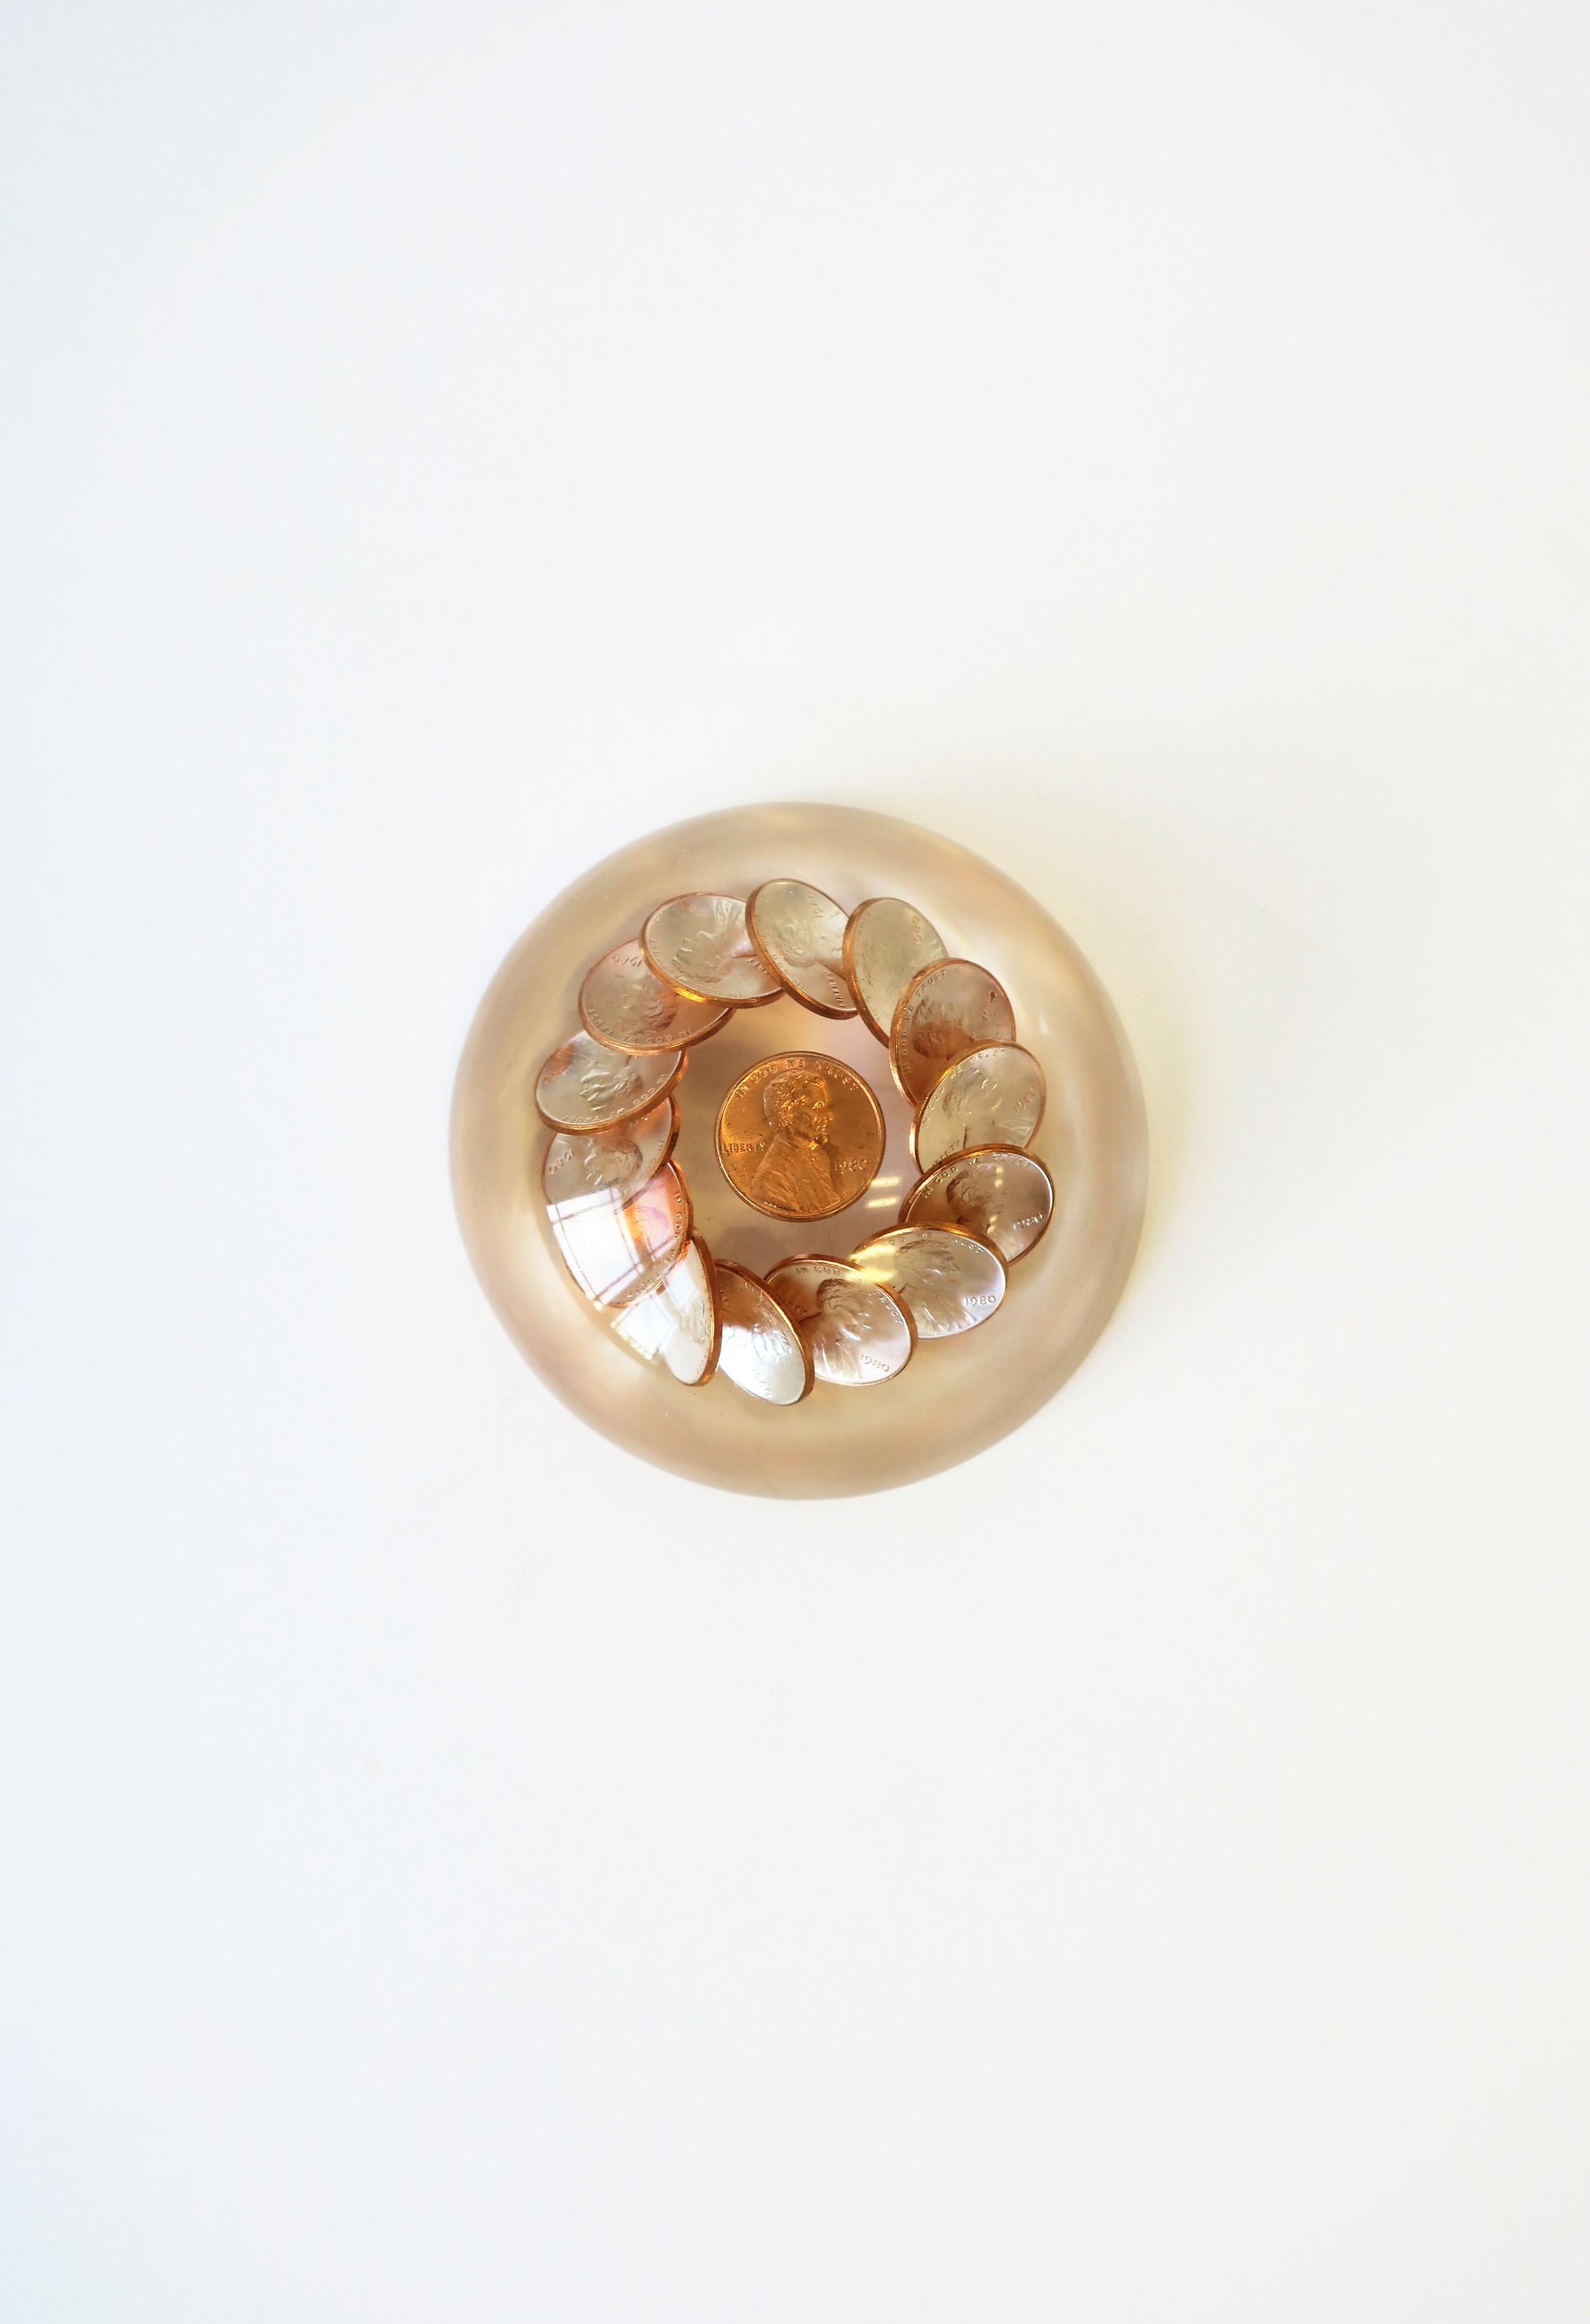 An '80s modern or Postmodern period Lucite and copper U.S. penny paperweight, 1980, USA. All pennies are of the year 1980. A great desk accessory or decorative object. Dimensions: 3.5